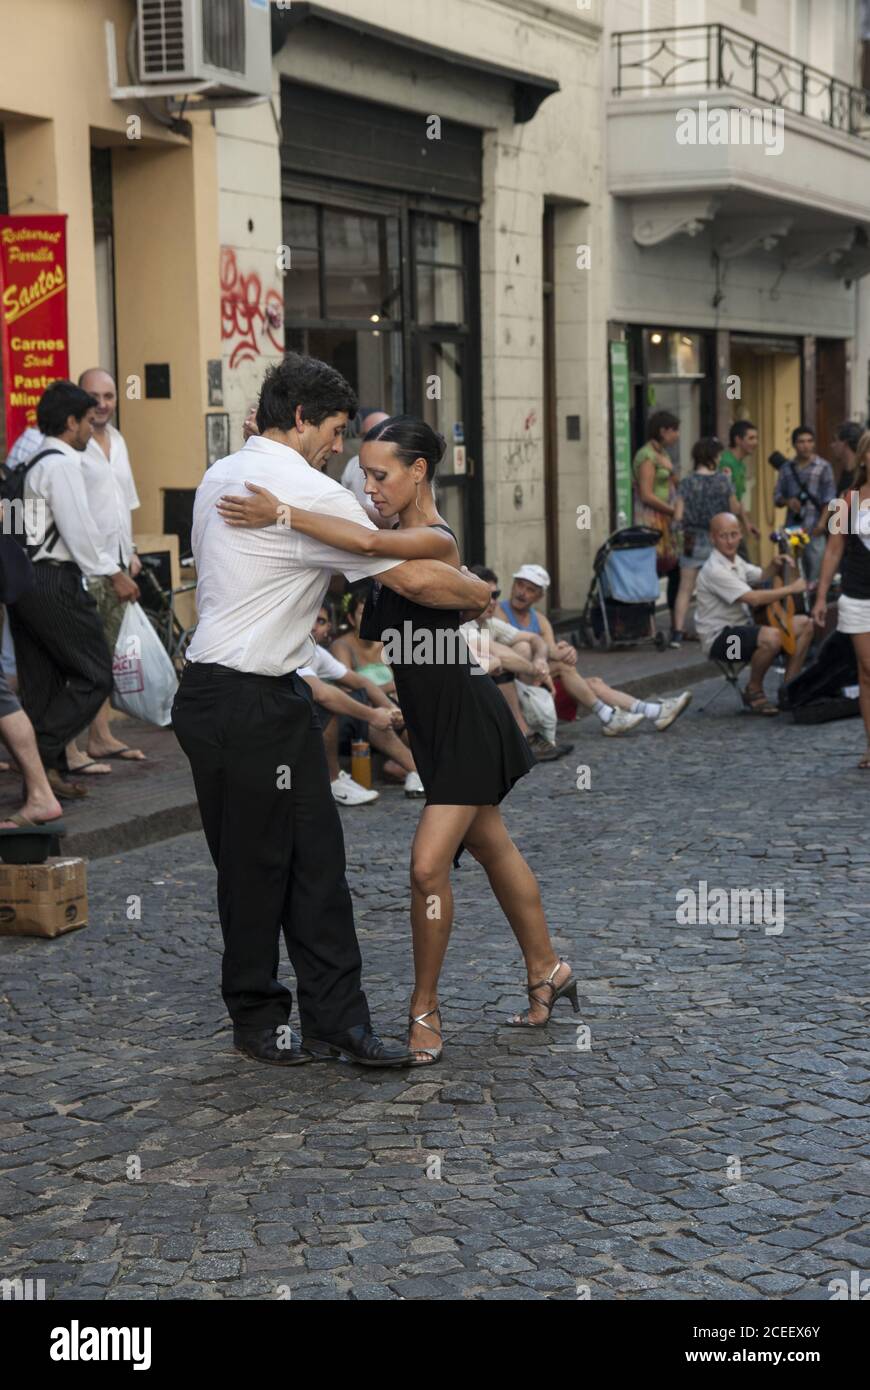 BUENOS AIRES, ARGENTINA - Mar 30, 2009: A couple of dancers does a street tango performance in Defensa Street in San Telmo, the oldest district in Bue Stock Photo